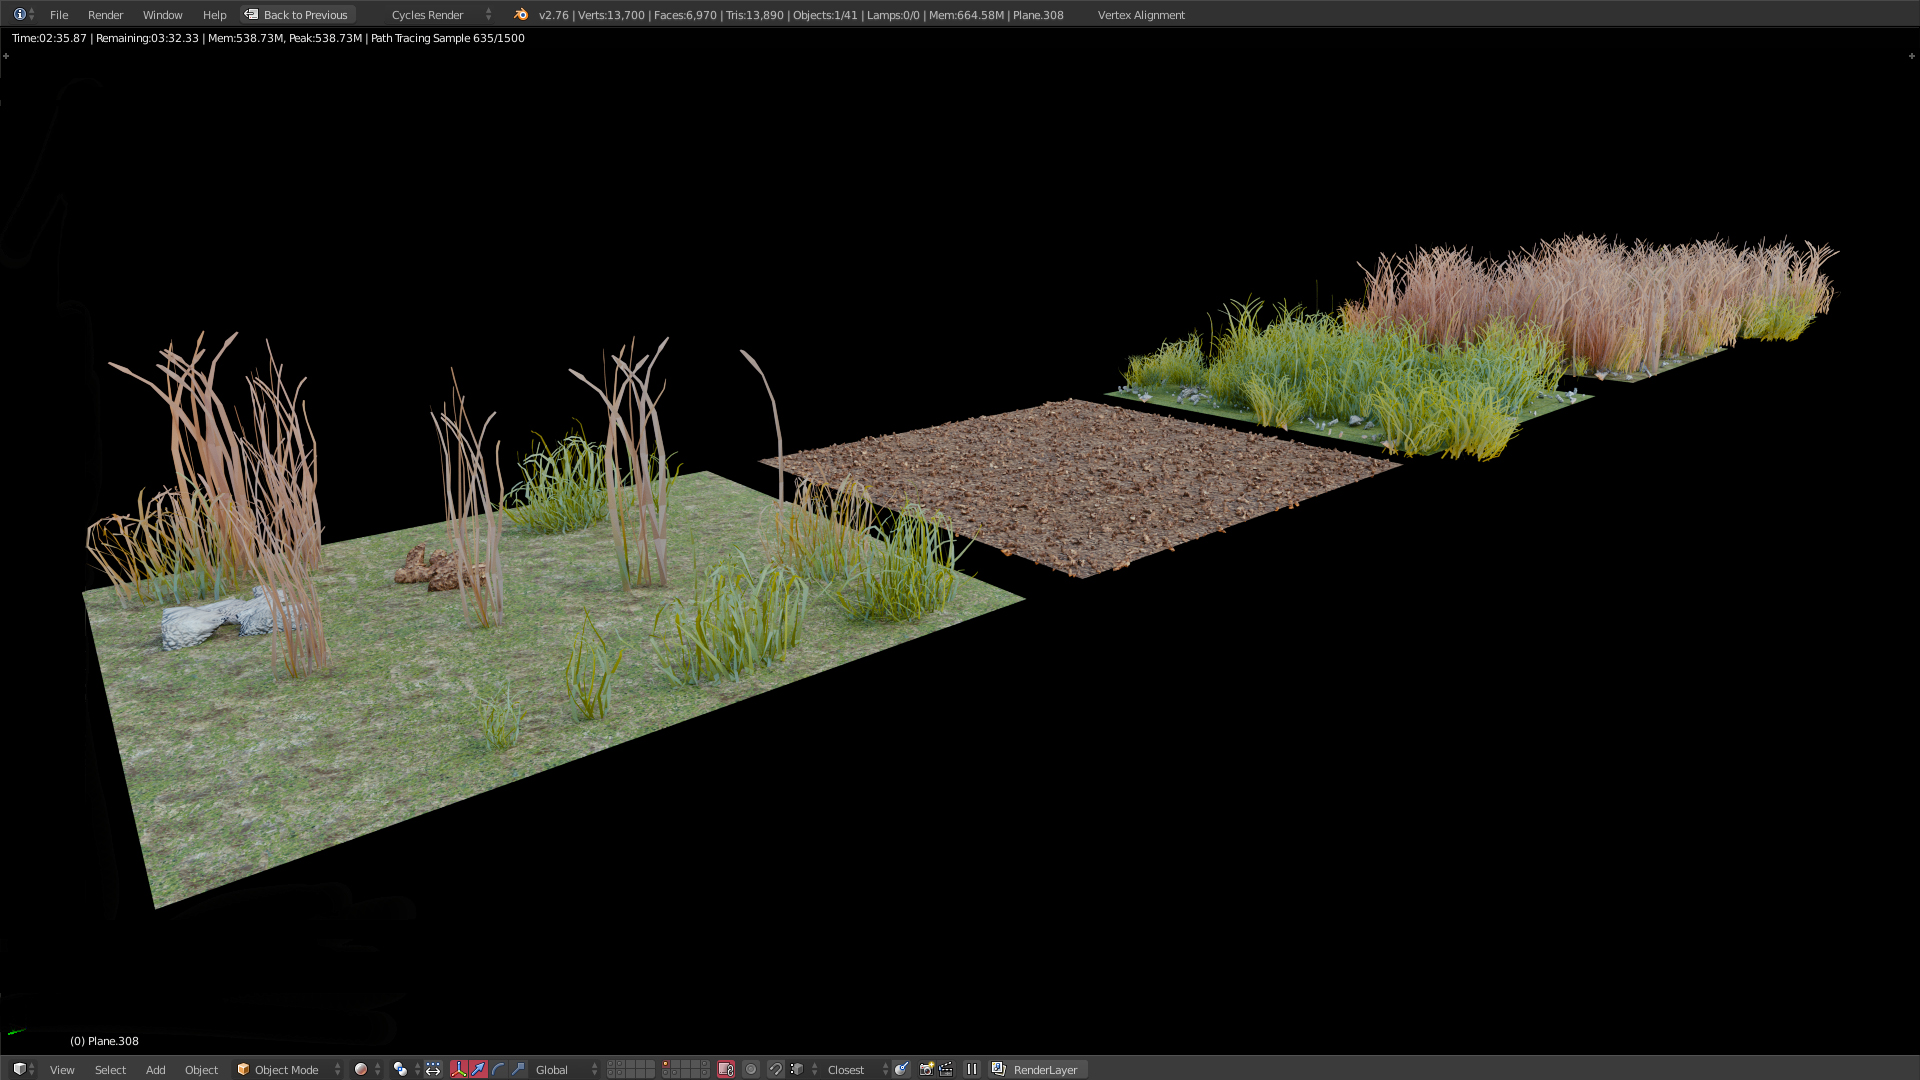 I modeled six variations of stones and some more grass